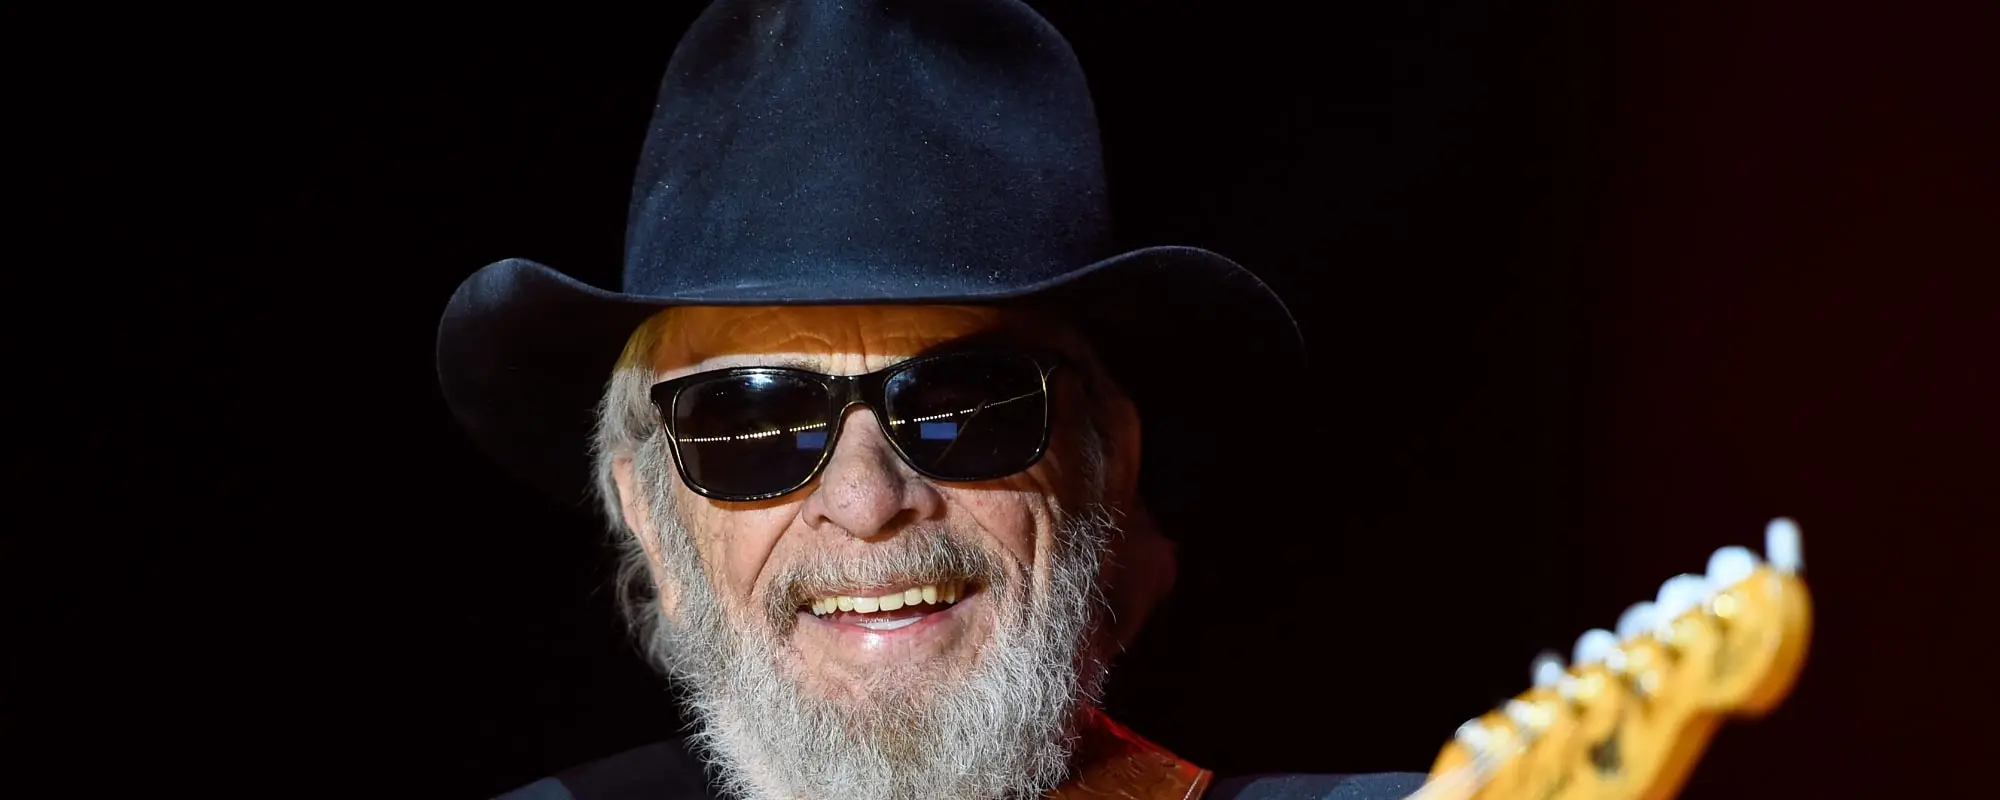 Merle Haggard wrote one of the best outlaw country songs about mom.